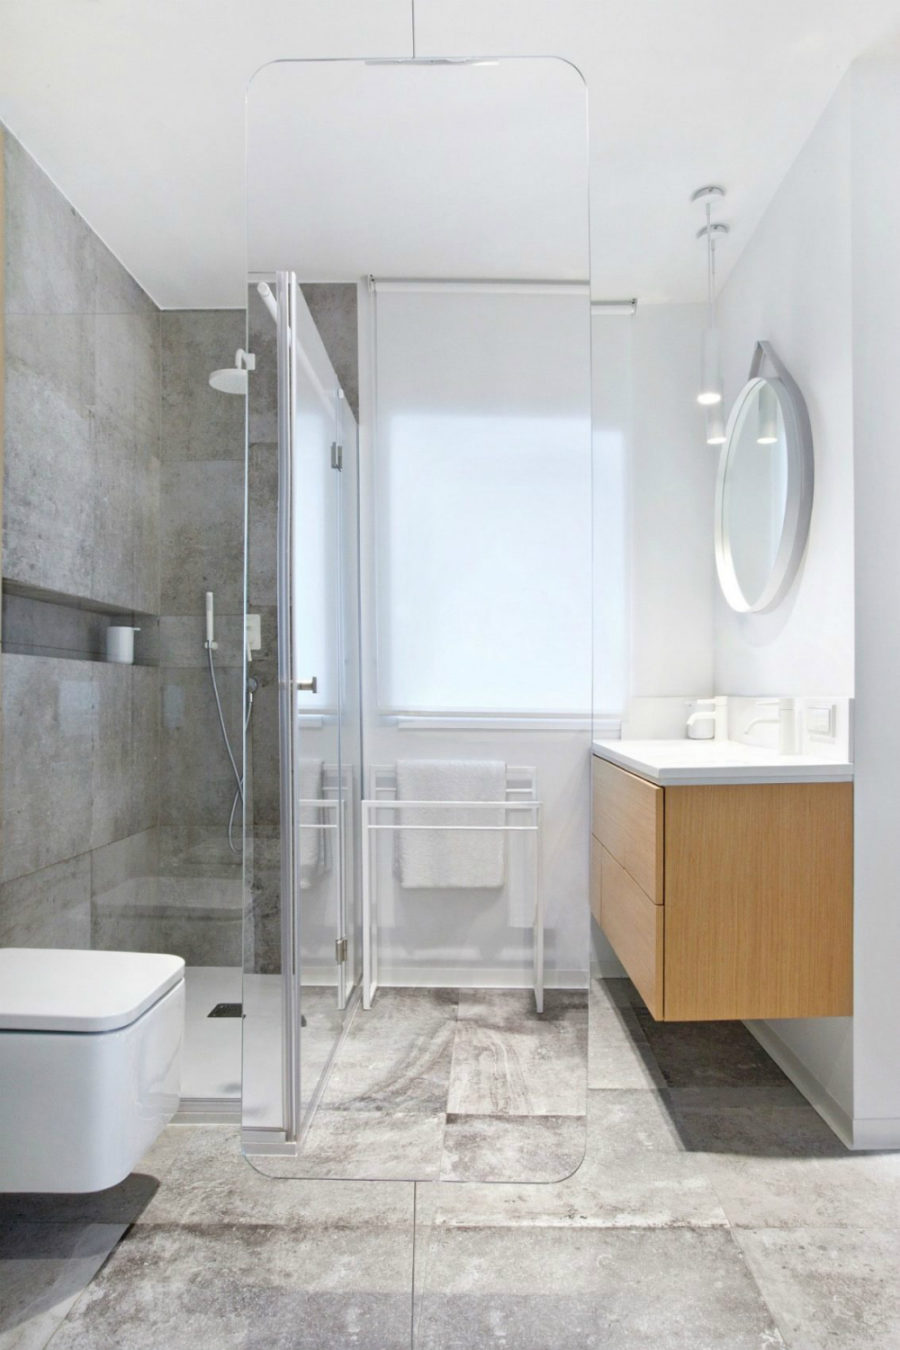 A rounded angle glass divider demarcates areas in the bathroom